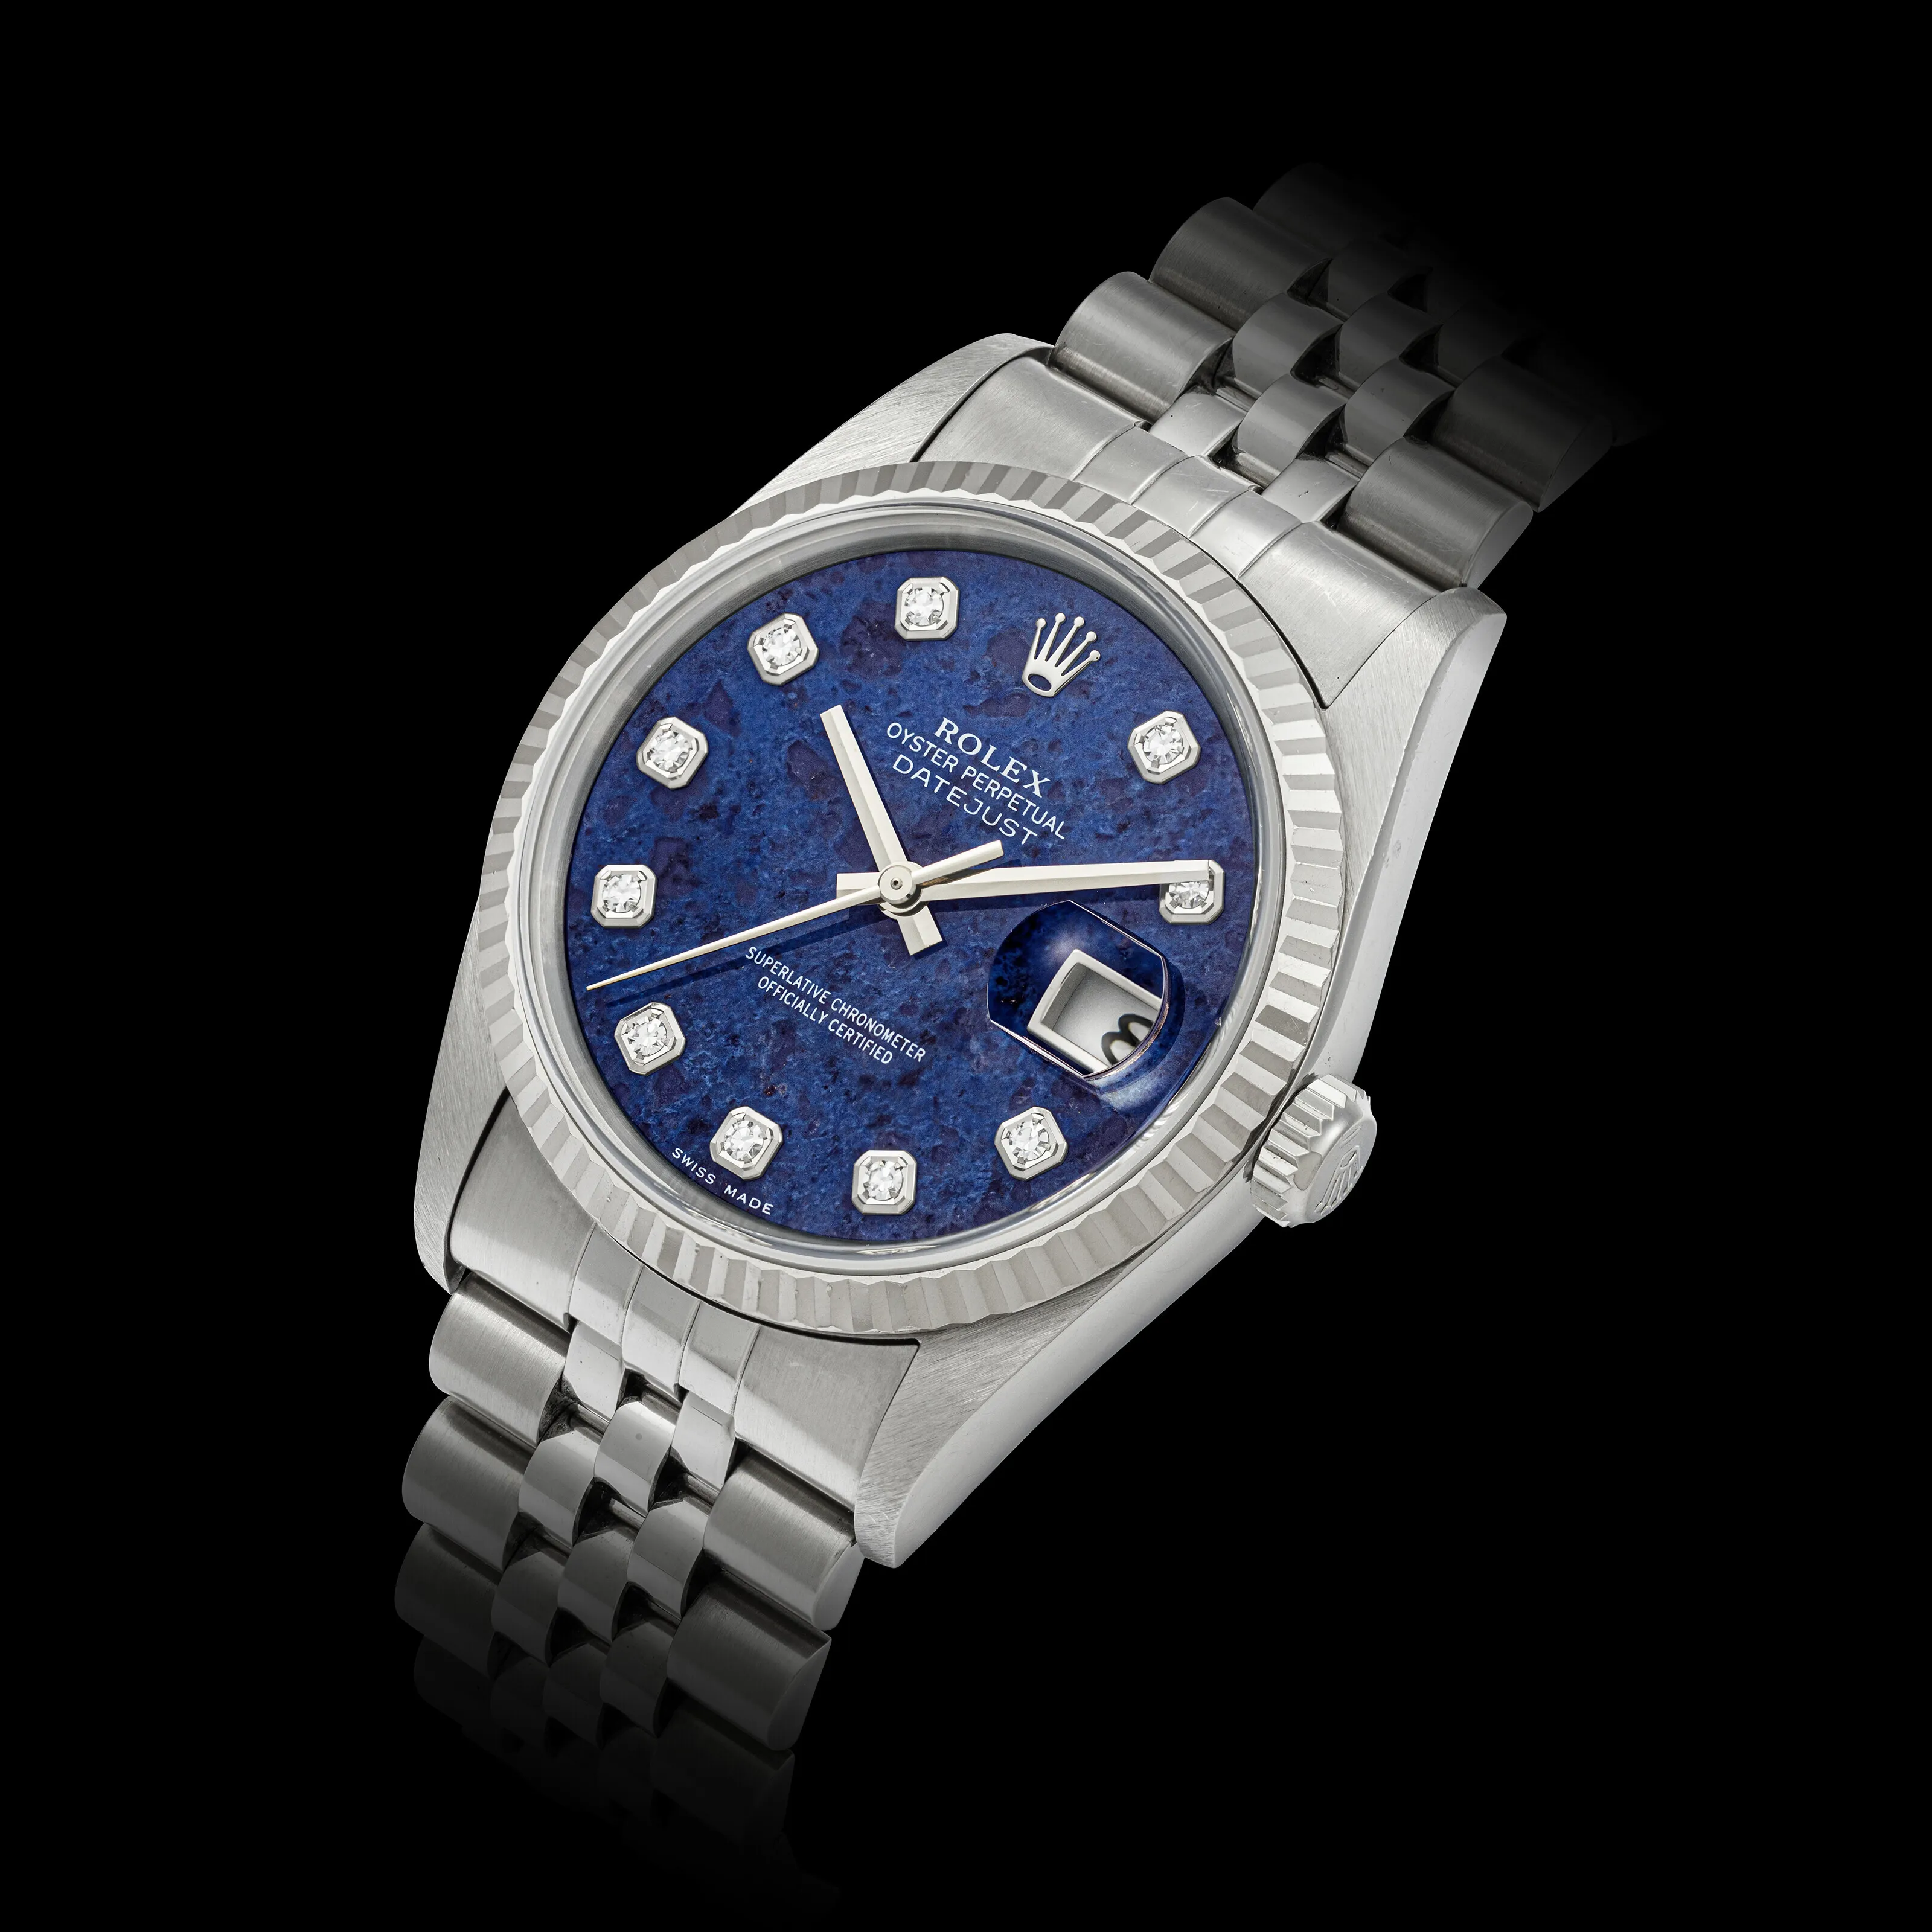 Rolex Datejust 36 16234 36mm White gold and stainless steel Sodalite